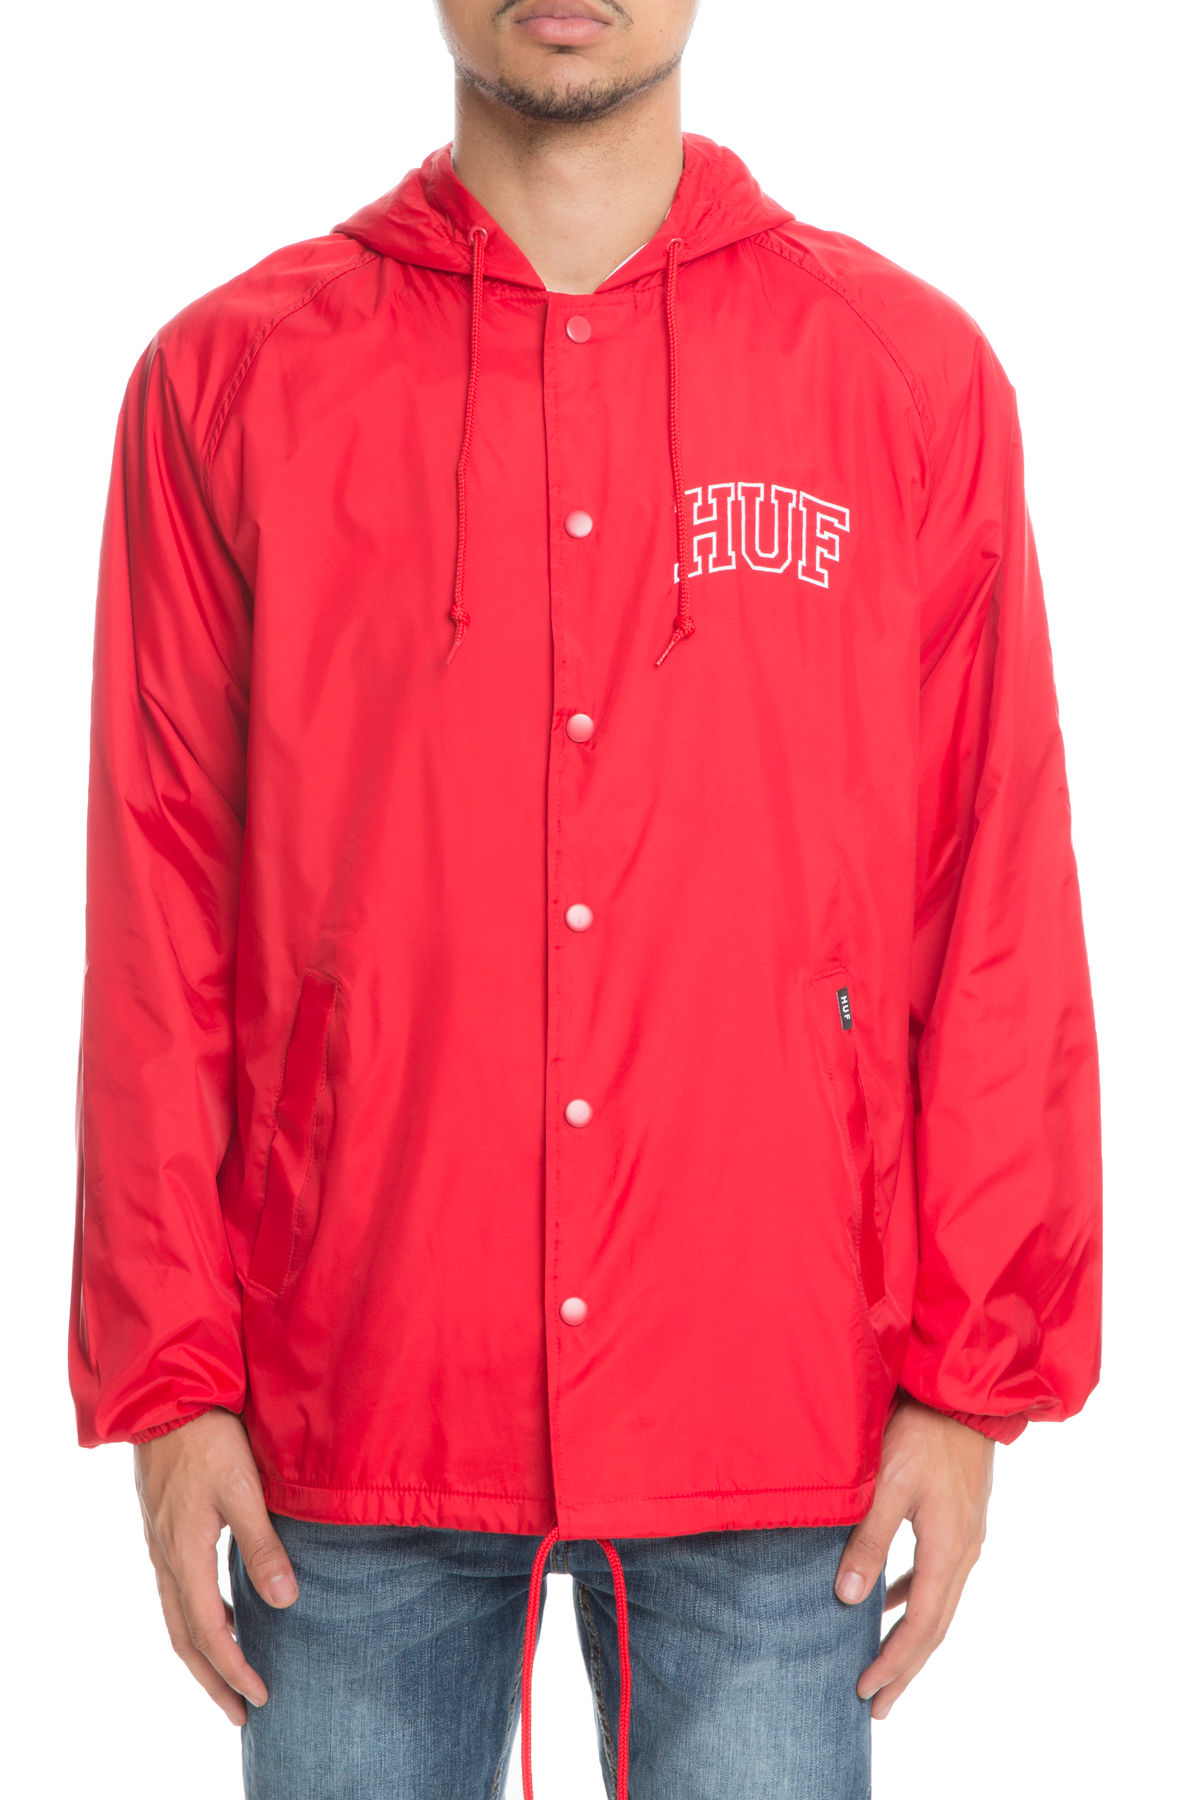 THE ARCH LOGO HOODED COACHES JACKET IN JK00052-RED